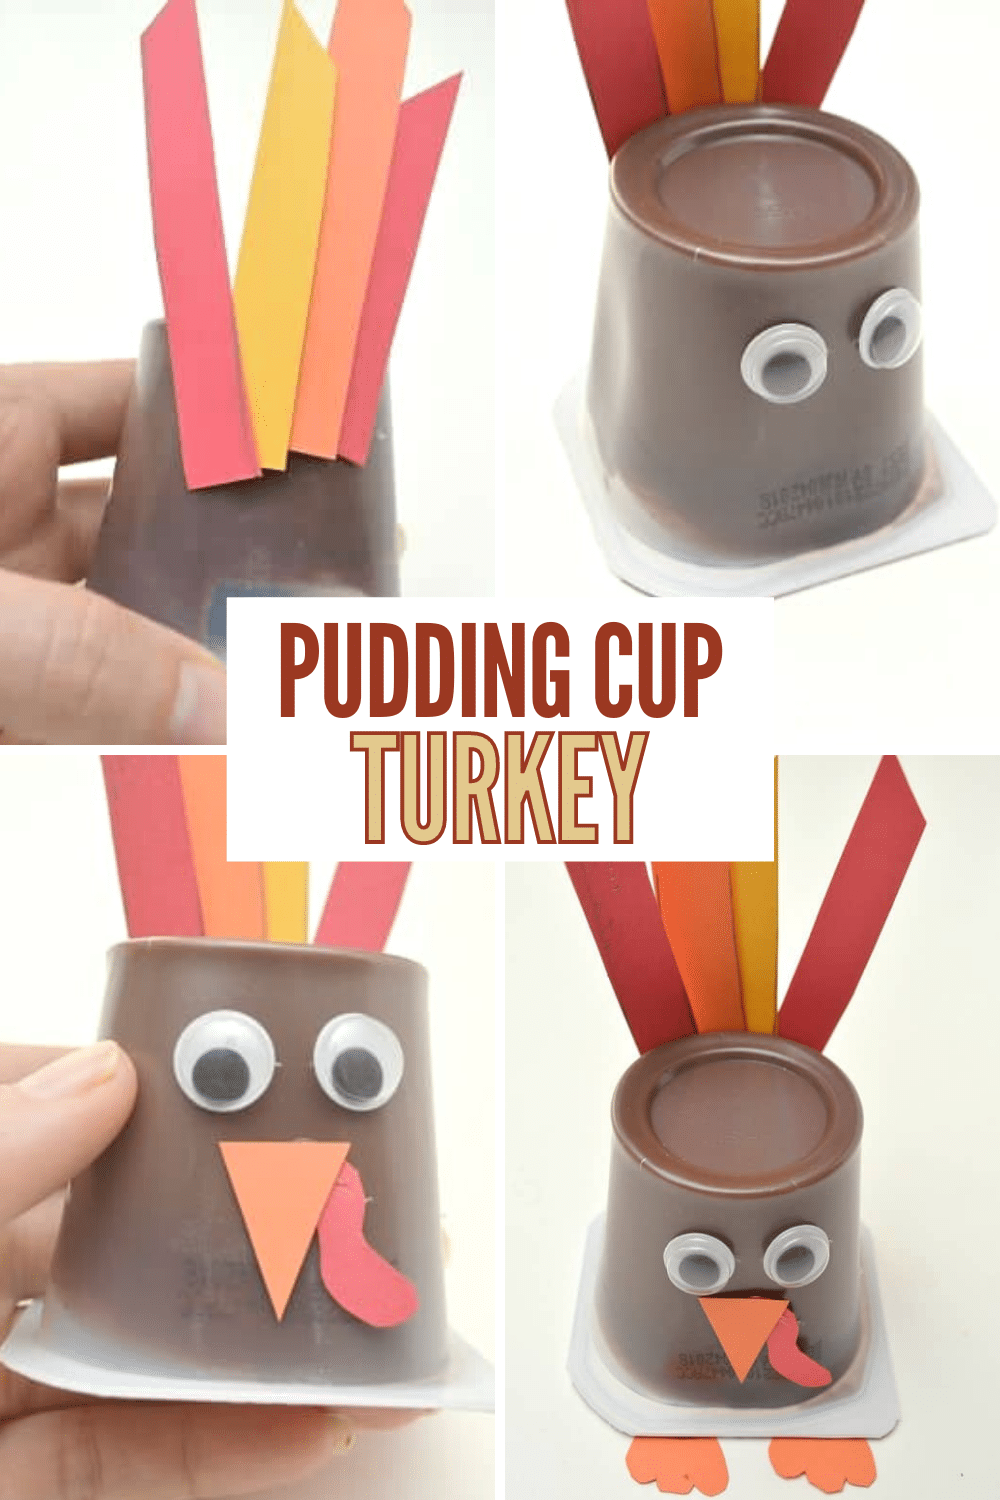 Learn how to create a festive pudding cup turkey craft for your Thanksgiving celebration.